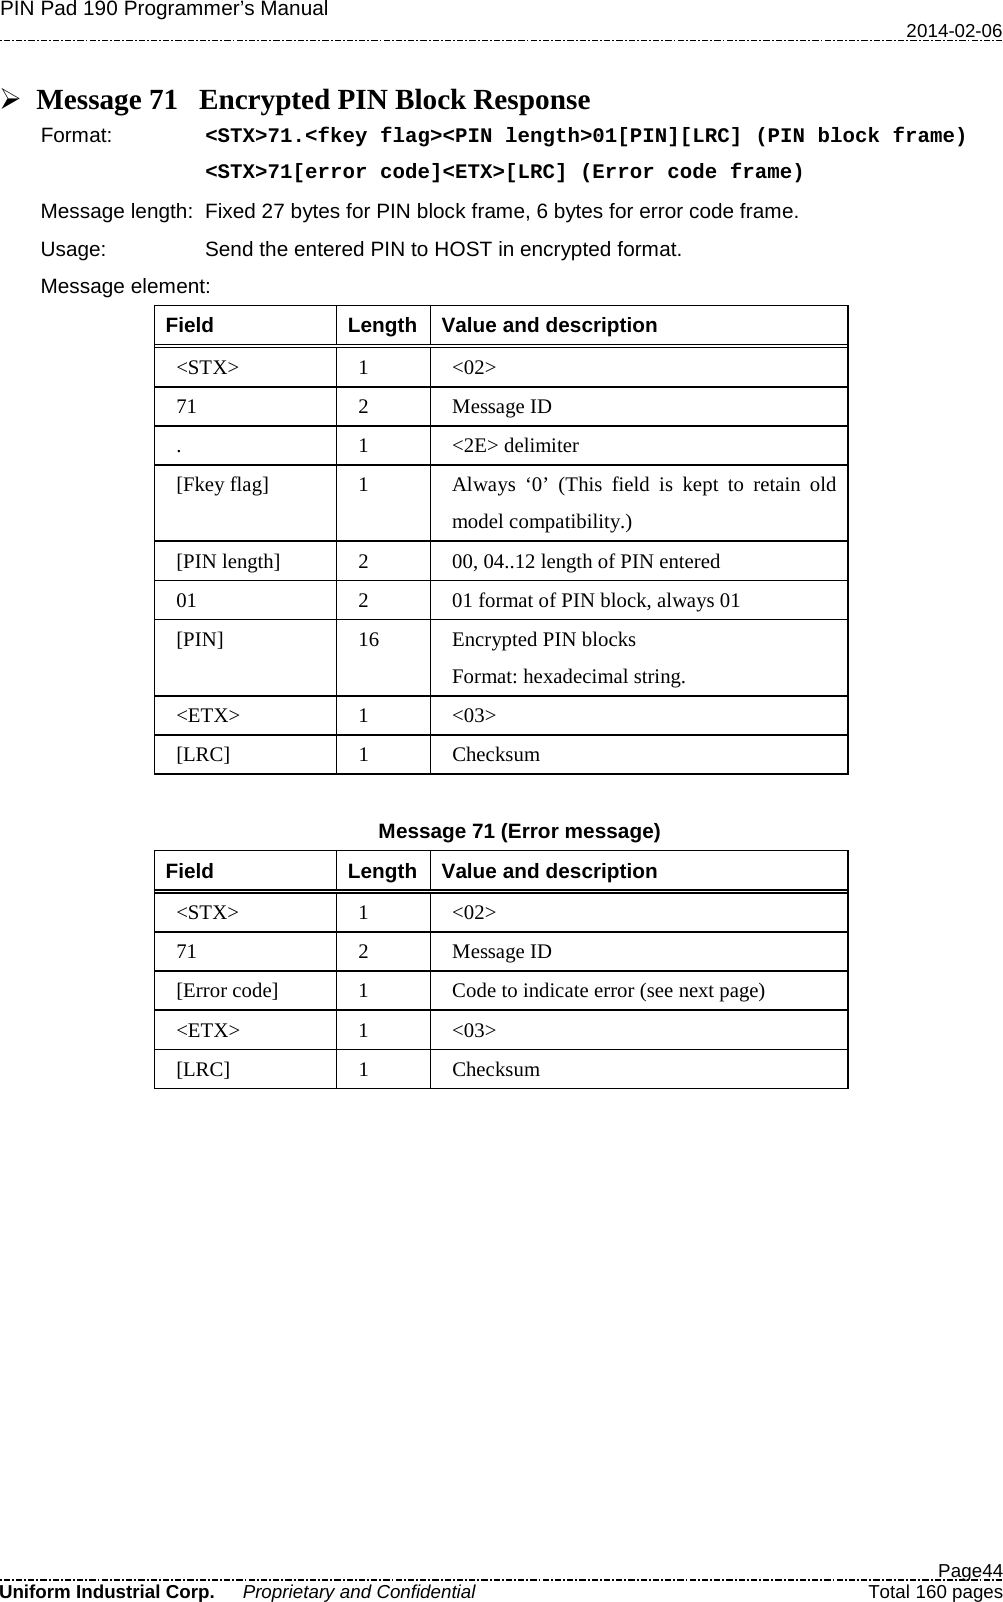 PIN Pad 190 Programmer’s Manual   2014-02-06  Page44 Uniform Industrial Corp. Proprietary and Confidential  Total 160 pages   Message 71 Encrypted PIN Block Response Format:   &lt;STX&gt;71.&lt;fkey flag&gt;&lt;PIN length&gt;01[PIN][LRC] (PIN block frame) &lt;STX&gt;71[error code]&lt;ETX&gt;[LRC] (Error code frame) Message length: Fixed 27 bytes for PIN block frame, 6 bytes for error code frame. Usage: Send the entered PIN to HOST in encrypted format. Message element:   Field  Length  Value and description &lt;STX&gt;  1  &lt;02&gt; 71  2  Message ID .  1  &lt;2E&gt; delimiter [Fkey flag]  1  Always  ‘0’  (This field is kept to retain old model compatibility.) [PIN length]  2  00, 04..12 length of PIN entered 01  2  01 format of PIN block, always 01 [PIN] 16  Encrypted PIN blocks Format: hexadecimal string. &lt;ETX&gt;  1  &lt;03&gt; [LRC]  1  Checksum  Message 71 (Error message) Field  Length  Value and description &lt;STX&gt;  1  &lt;02&gt; 71  2  Message ID [Error code]  1  Code to indicate error (see next page) &lt;ETX&gt;  1  &lt;03&gt; [LRC]  1  Checksum  